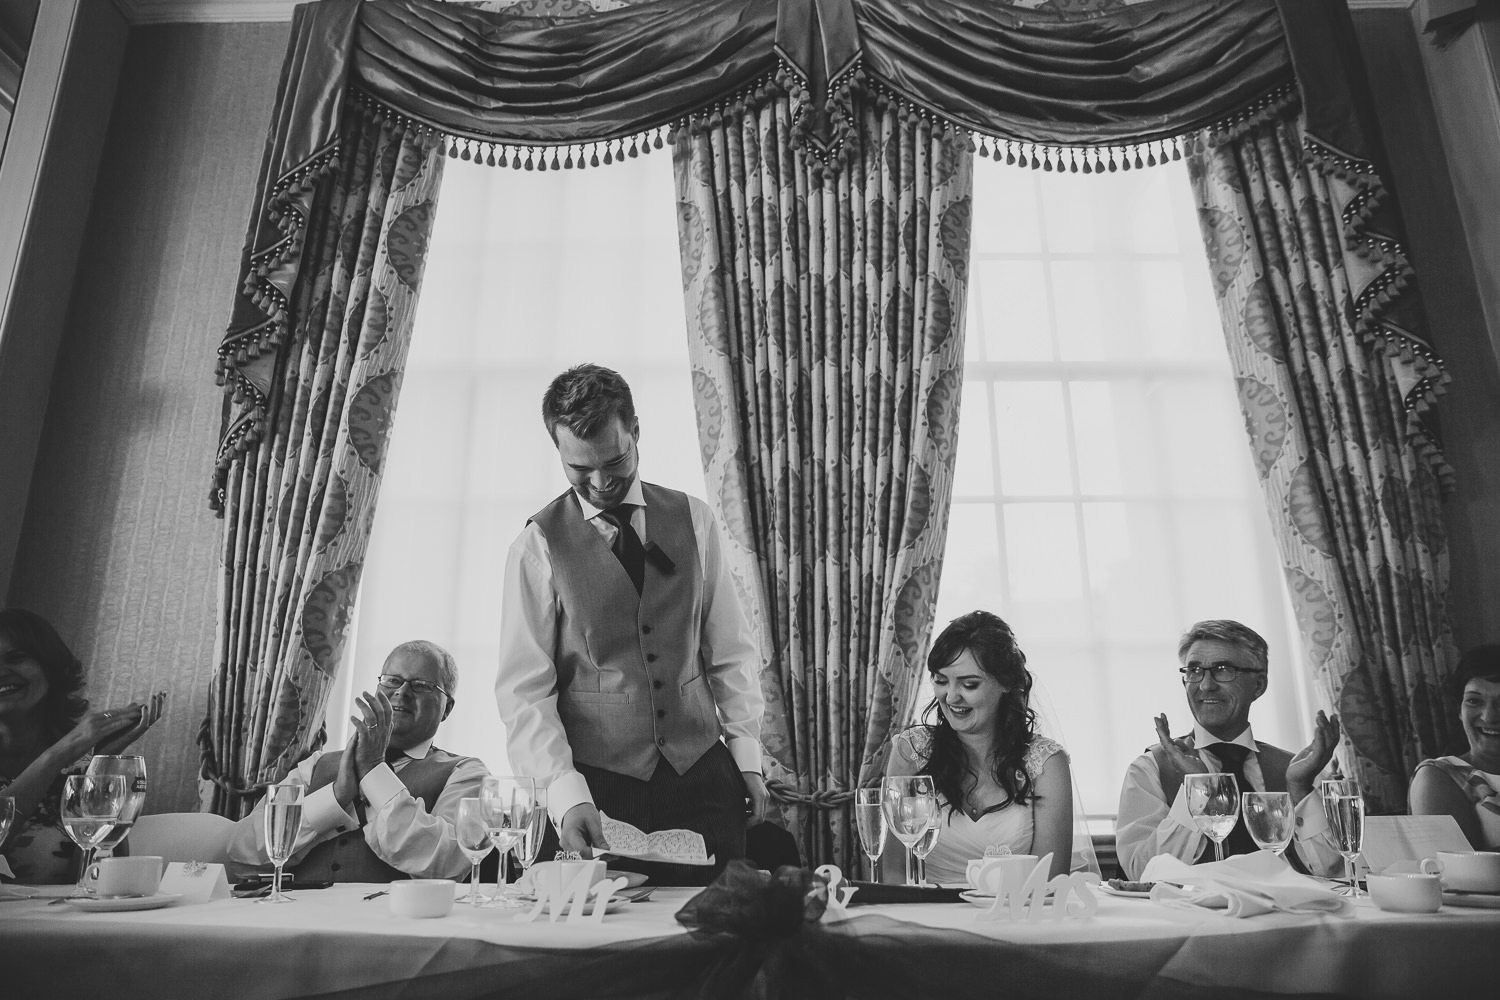 Black and white wedding photo of bride and groom during wedding speeches at top table a Richmond Hill Hotel, London